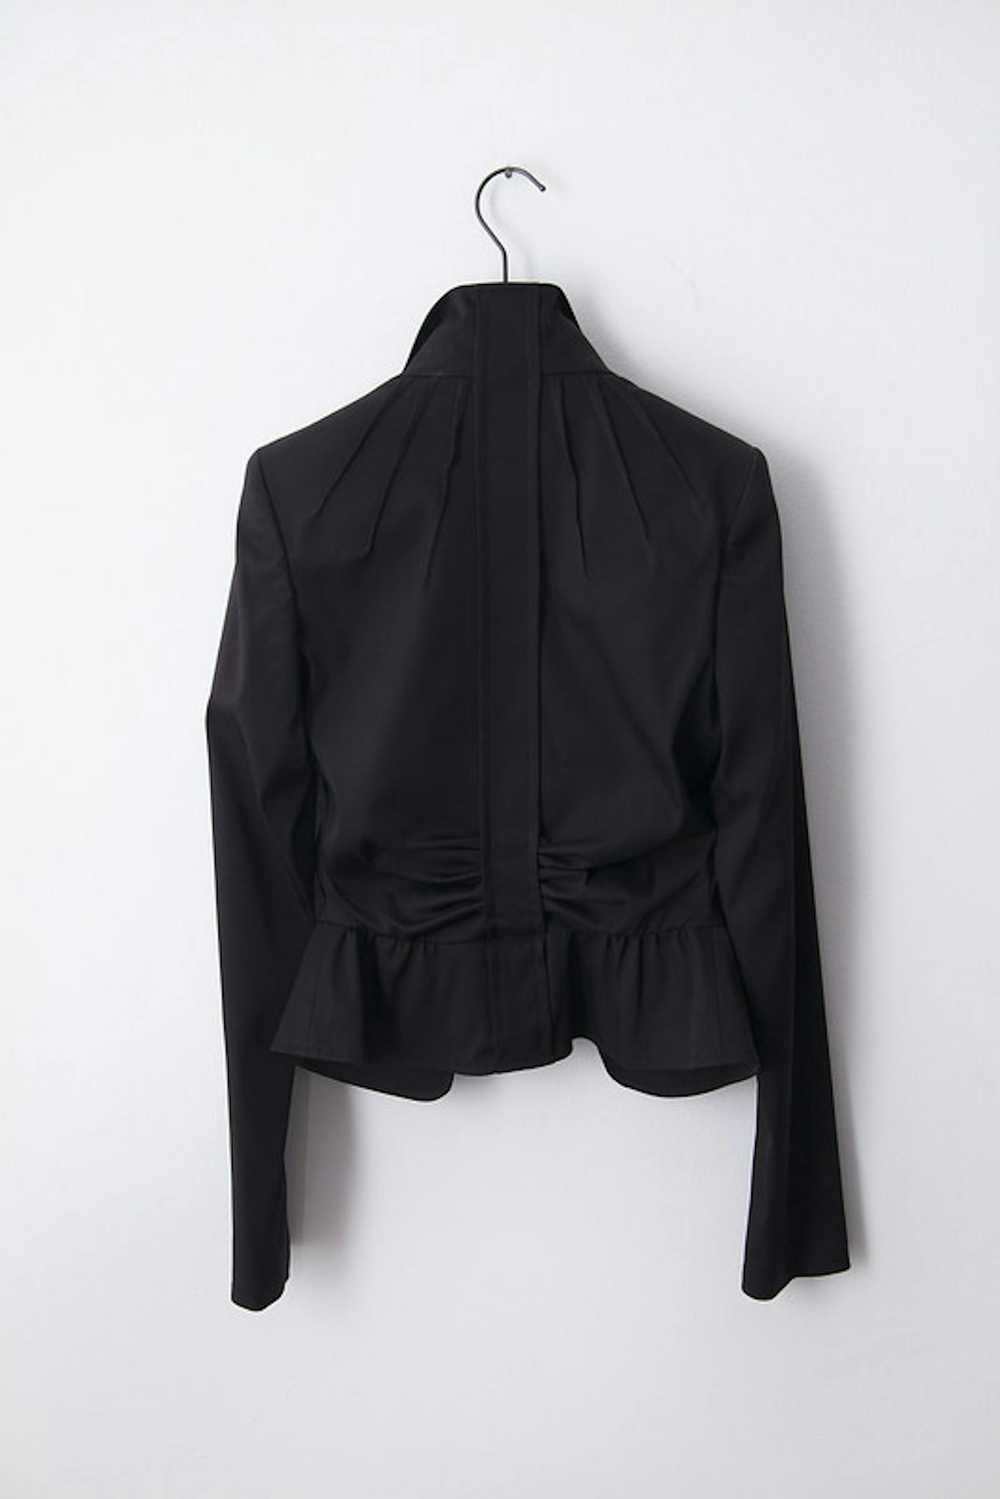 Gucci × Tom Ford AW04 iconic jacket - image 3